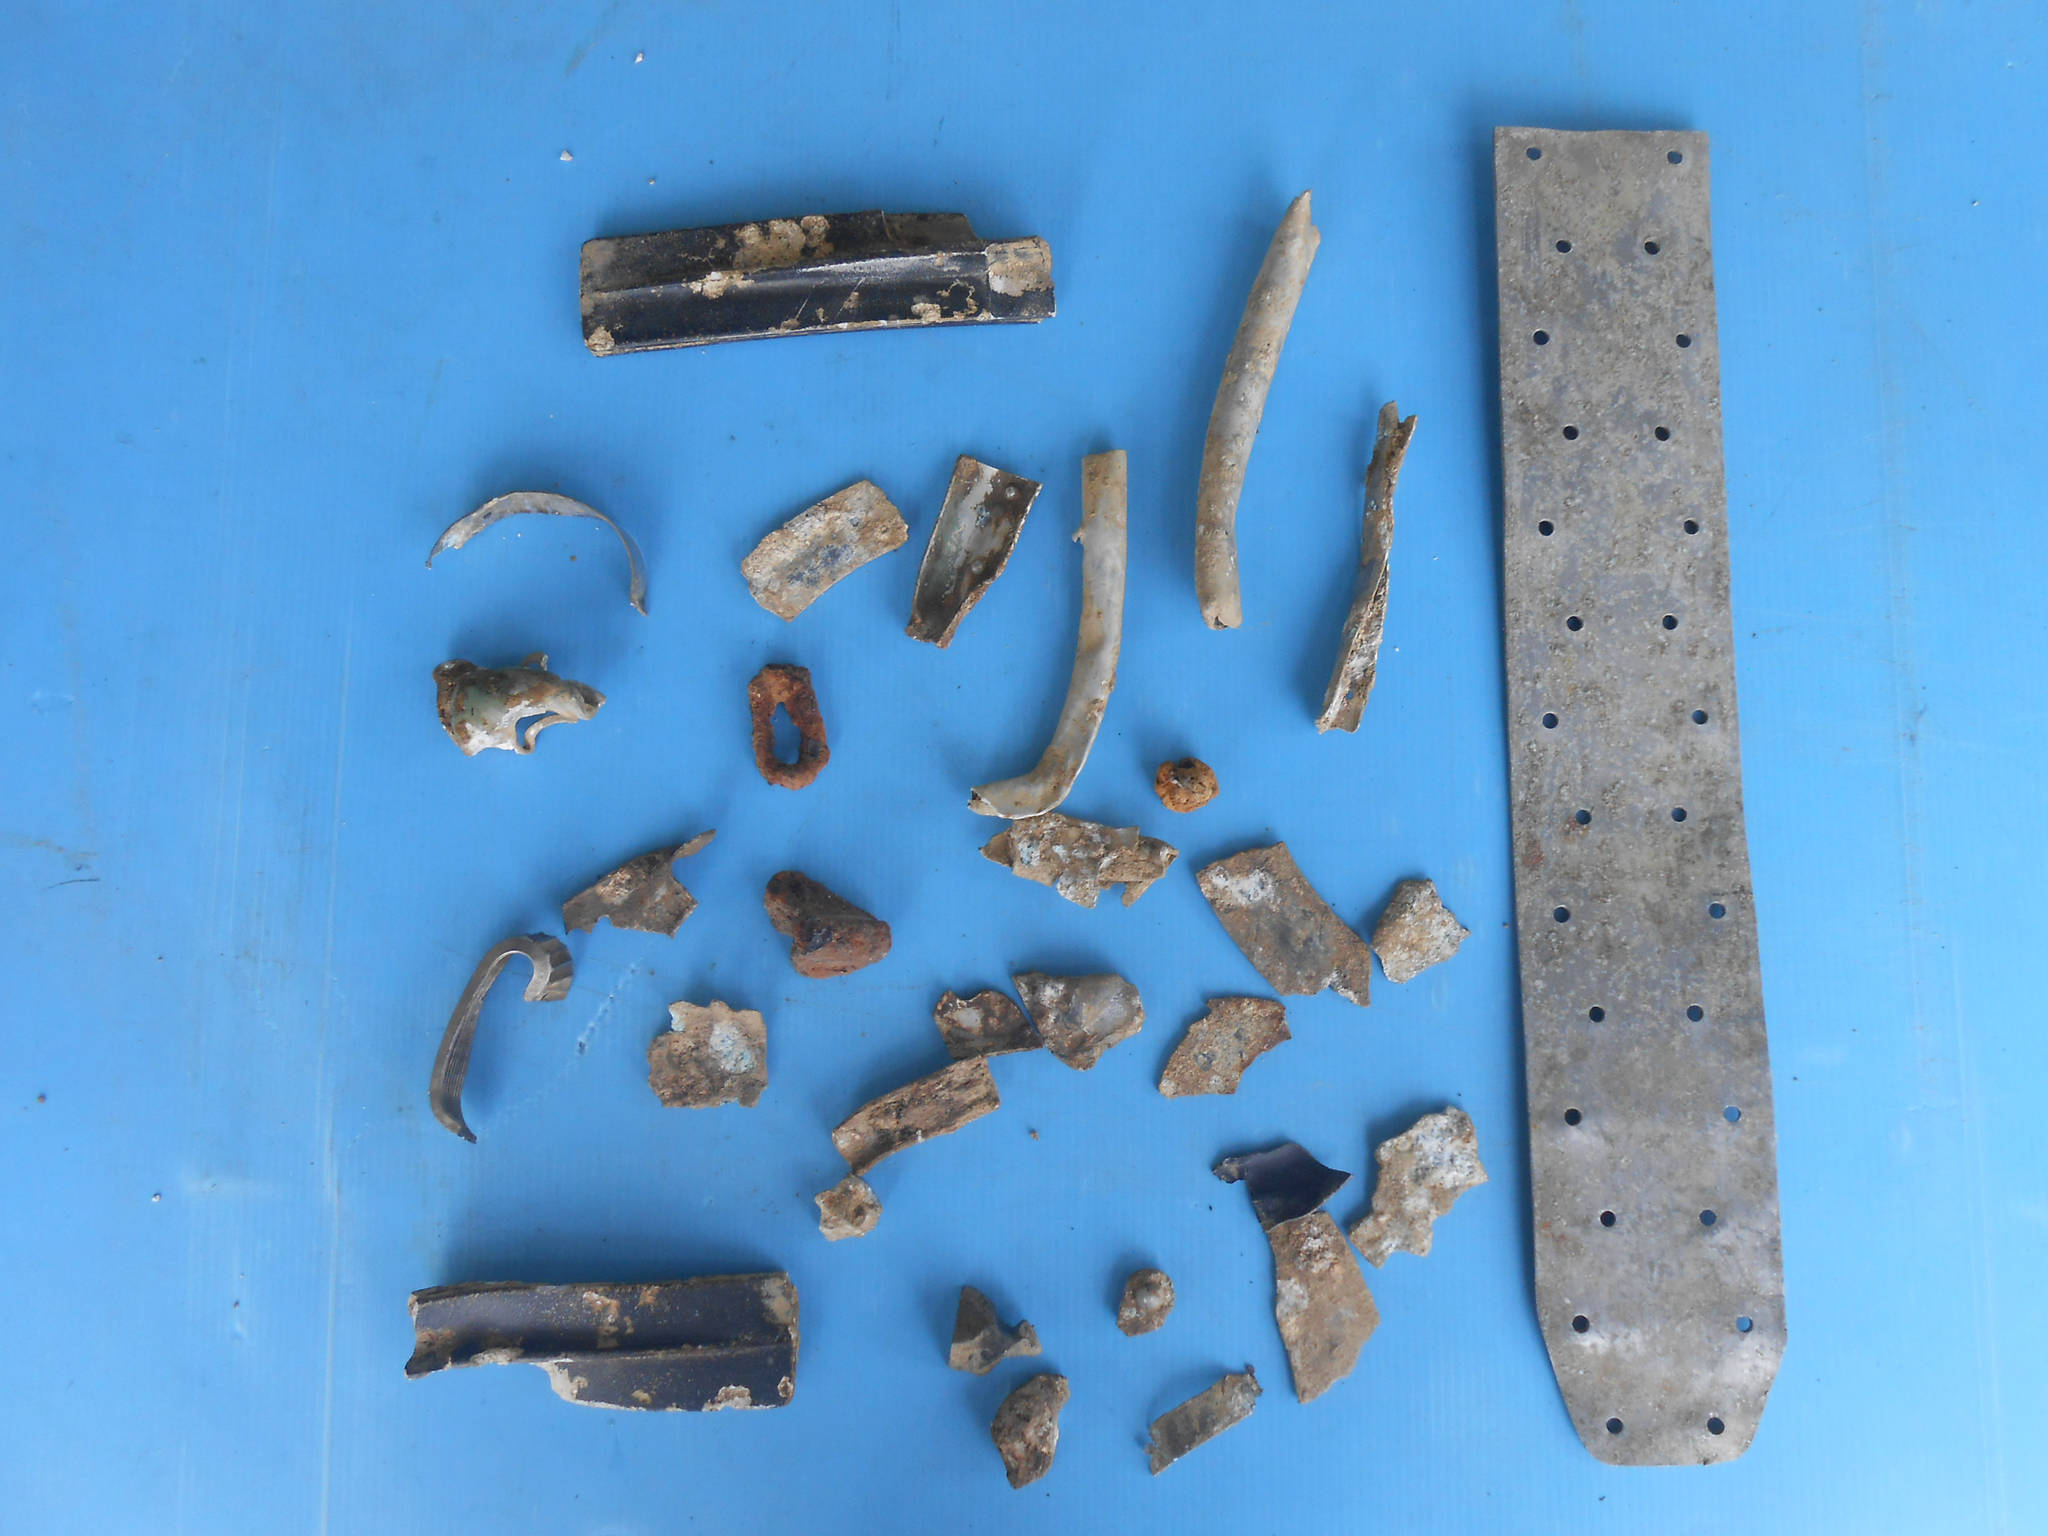 Pieces of the plane recovered from the Wellington crash site in Croatia. Photo: Submitted